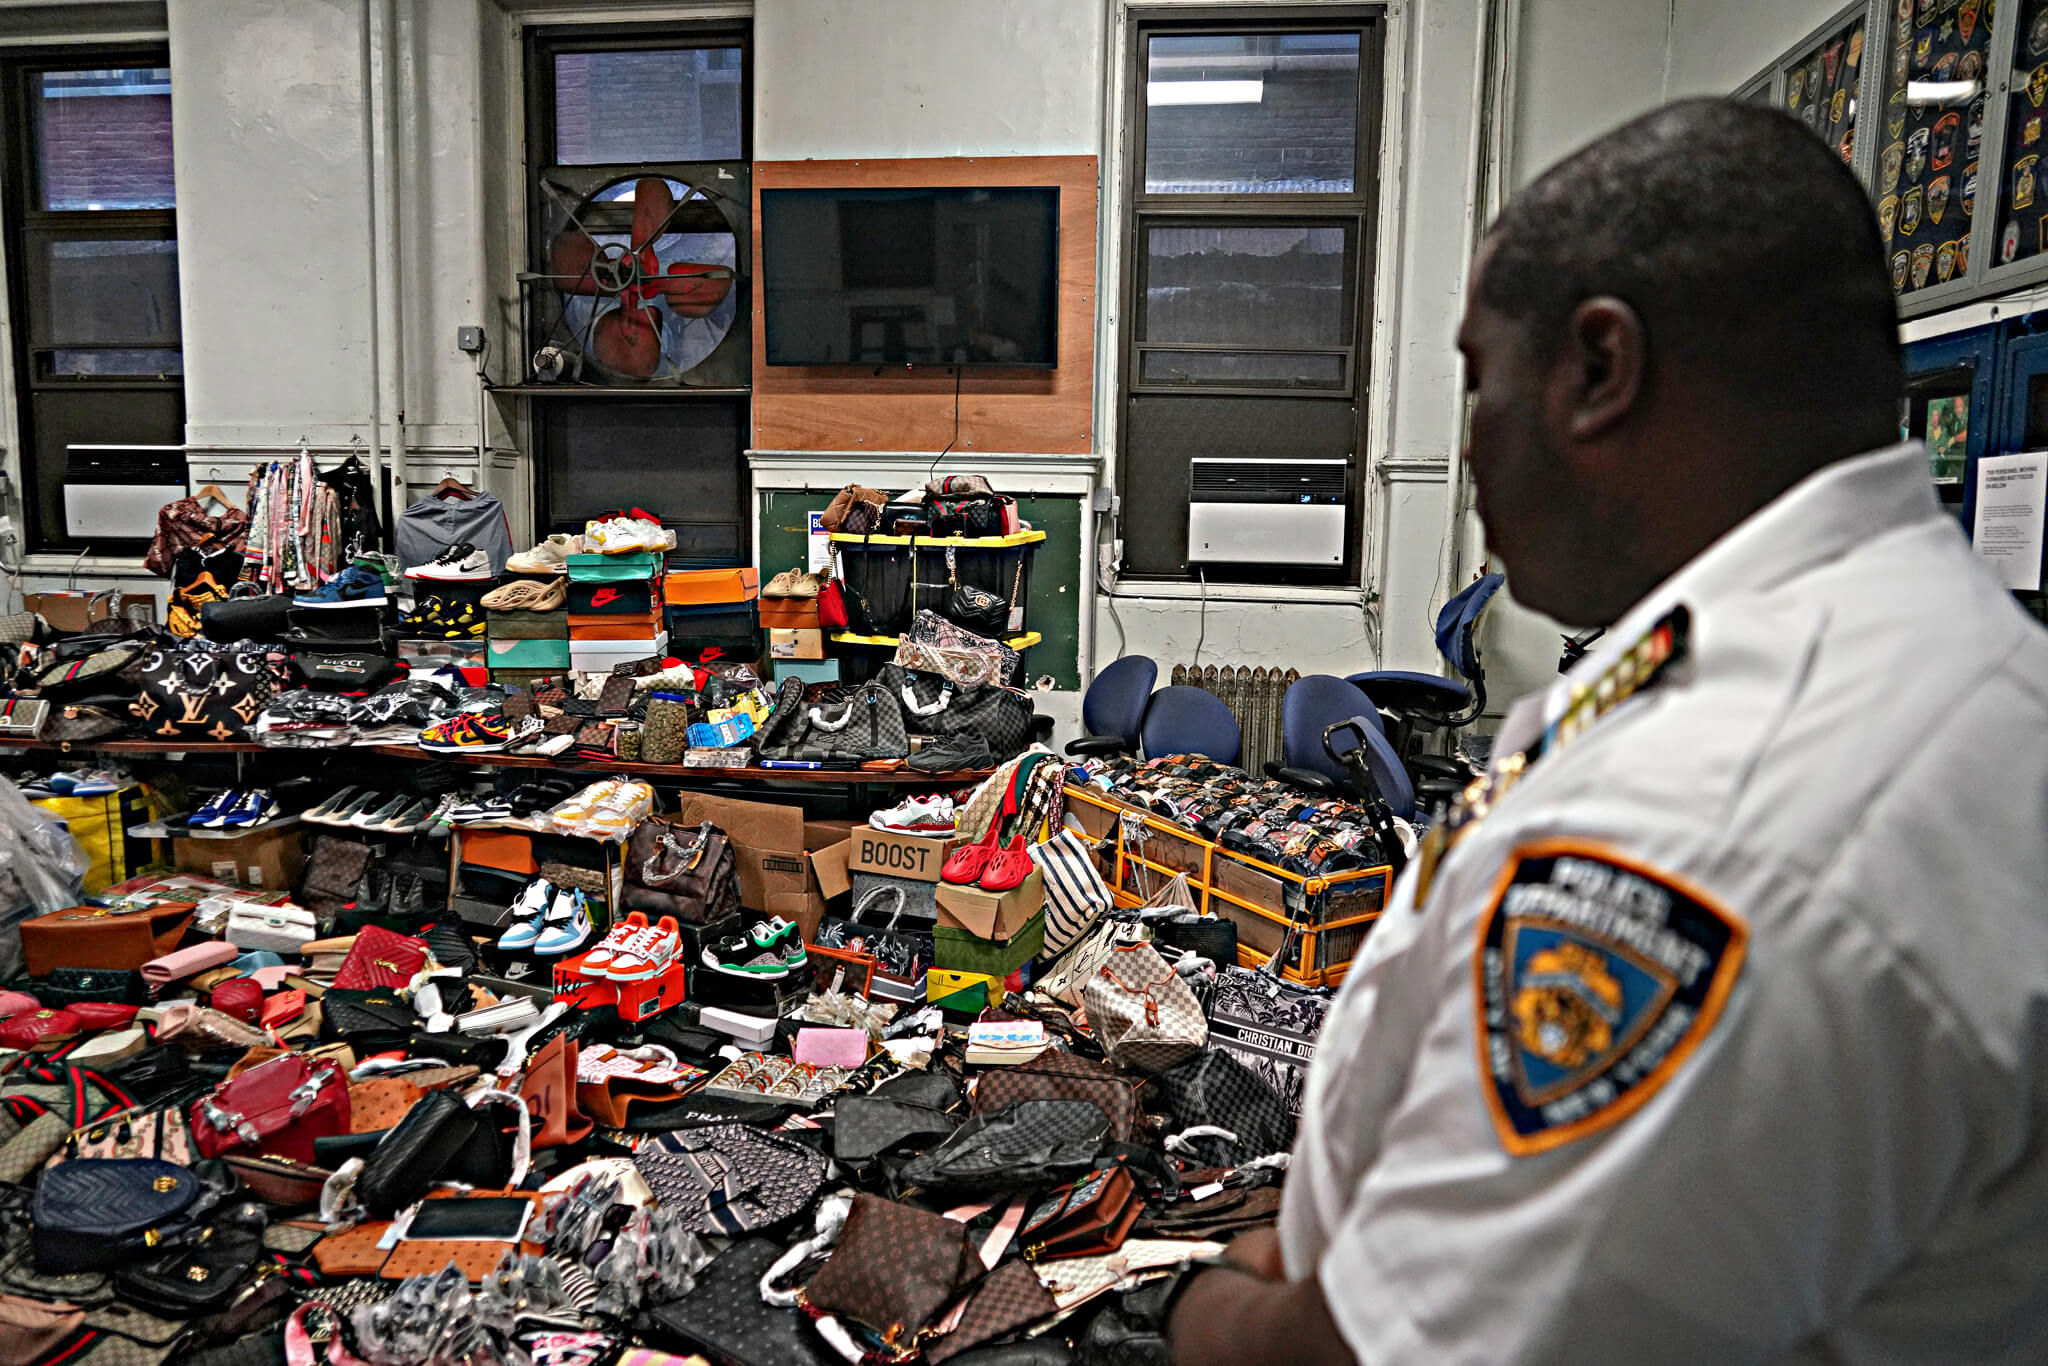 NYPD bags five street vendors peddling $2 million in counterfeit